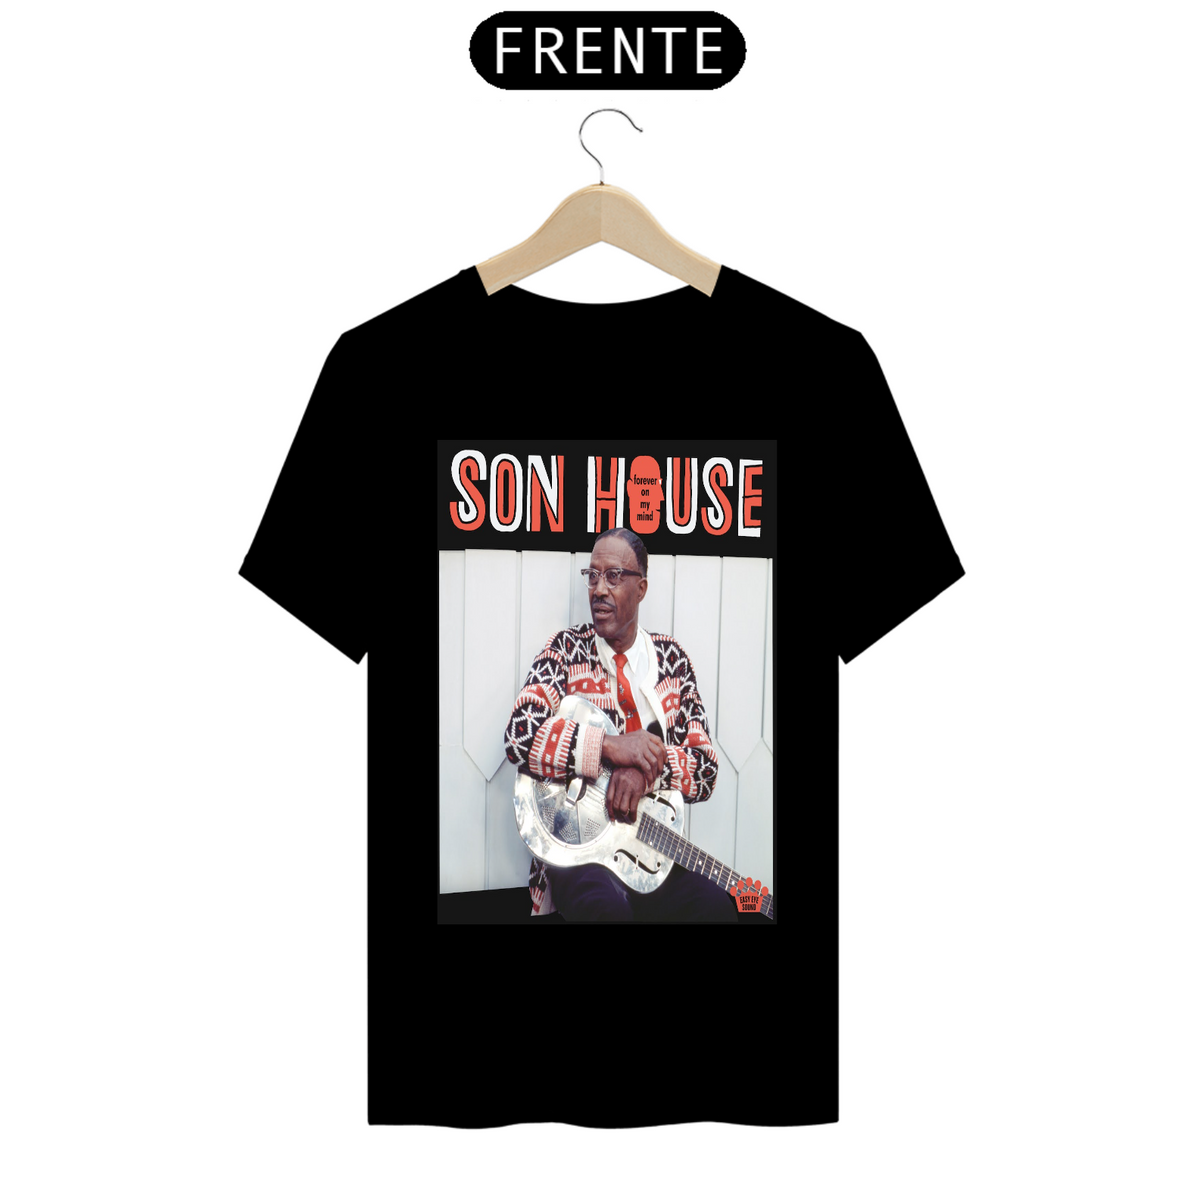 Nome do produto: Son House - Forever on my Mind